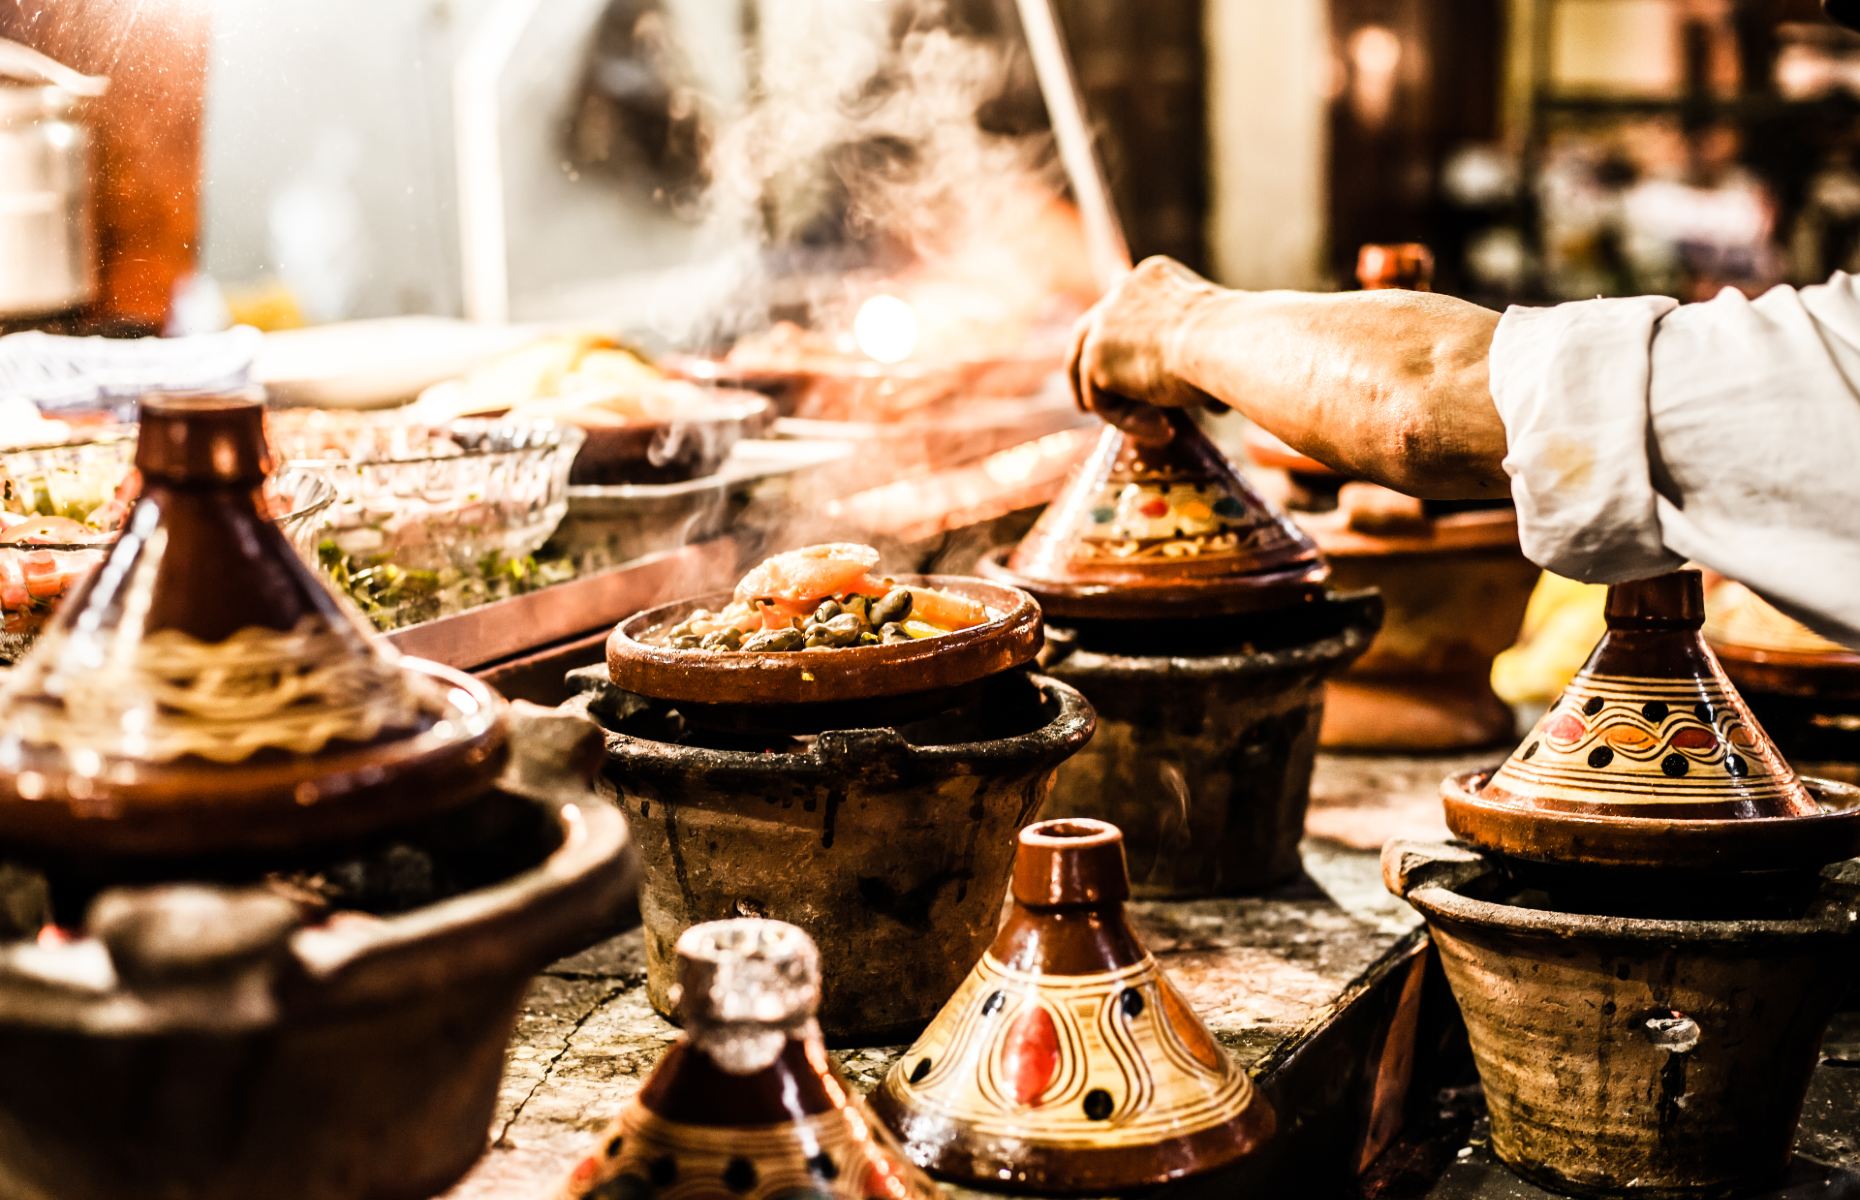 Tagine, a typical Moroccan dish (Image: Curioso.Photography/Shutterstock)